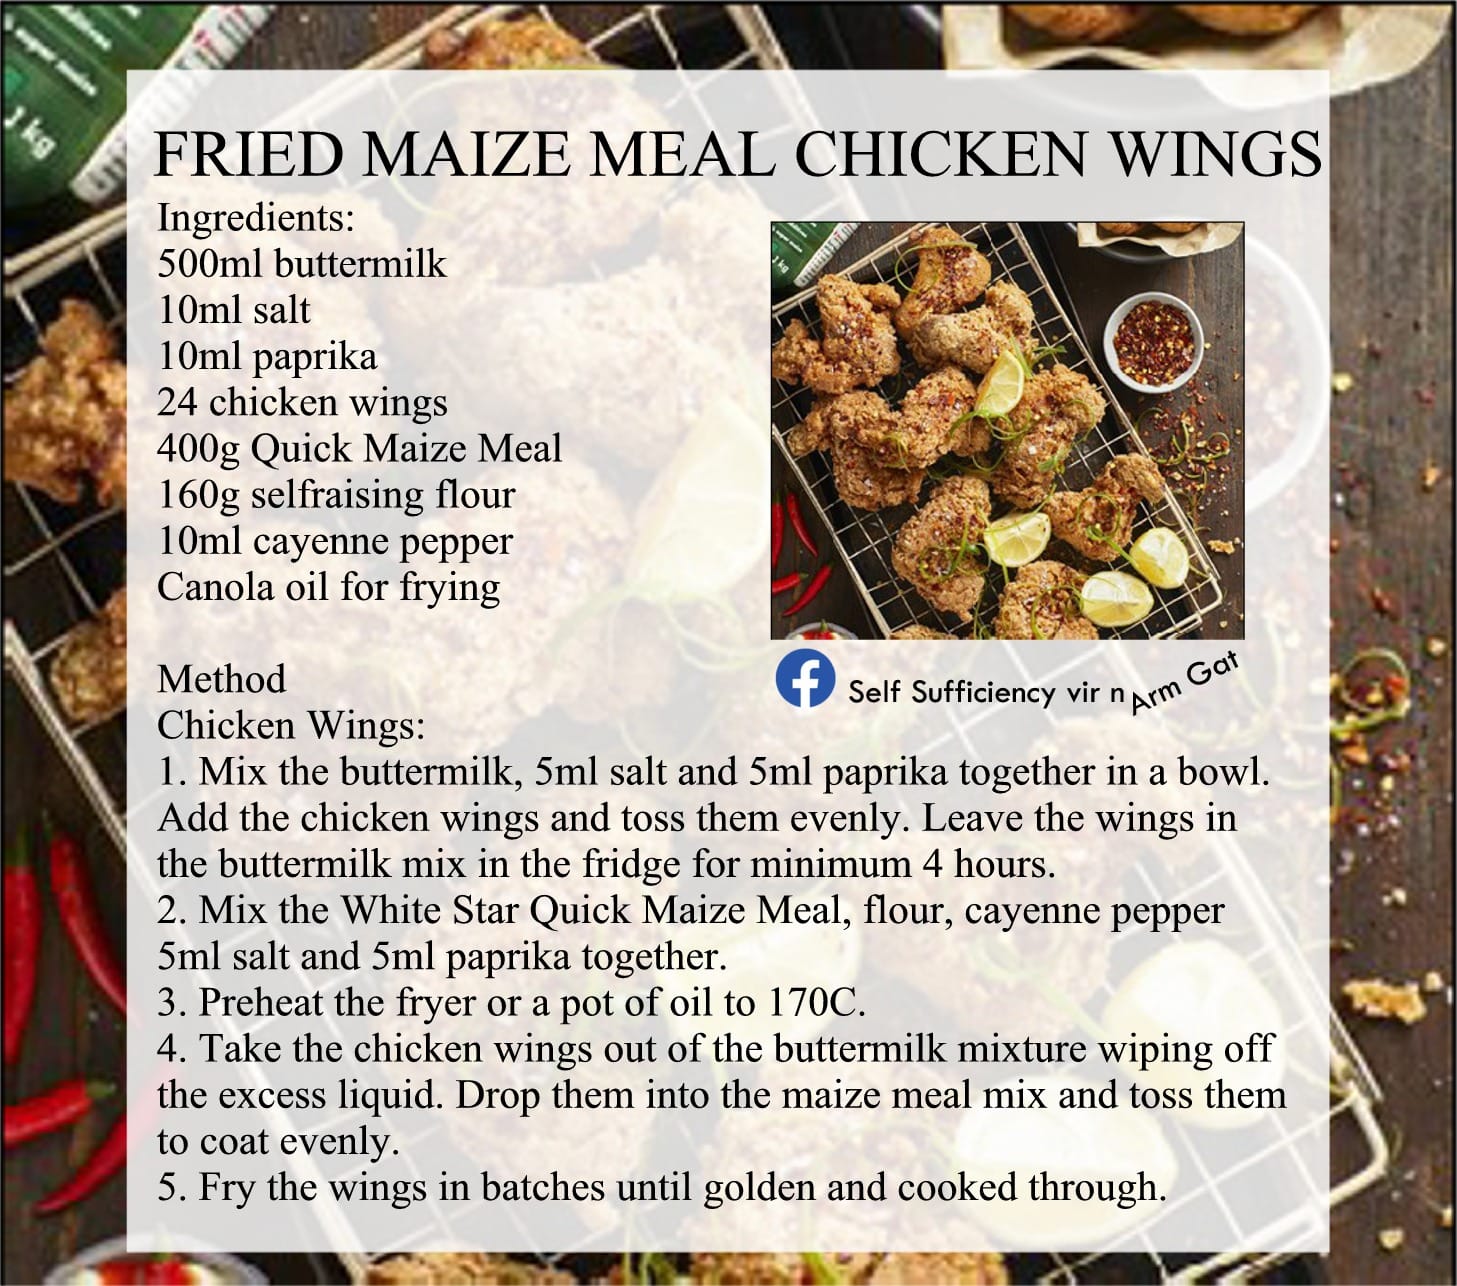 Fried Maize Meal Chicken Wings